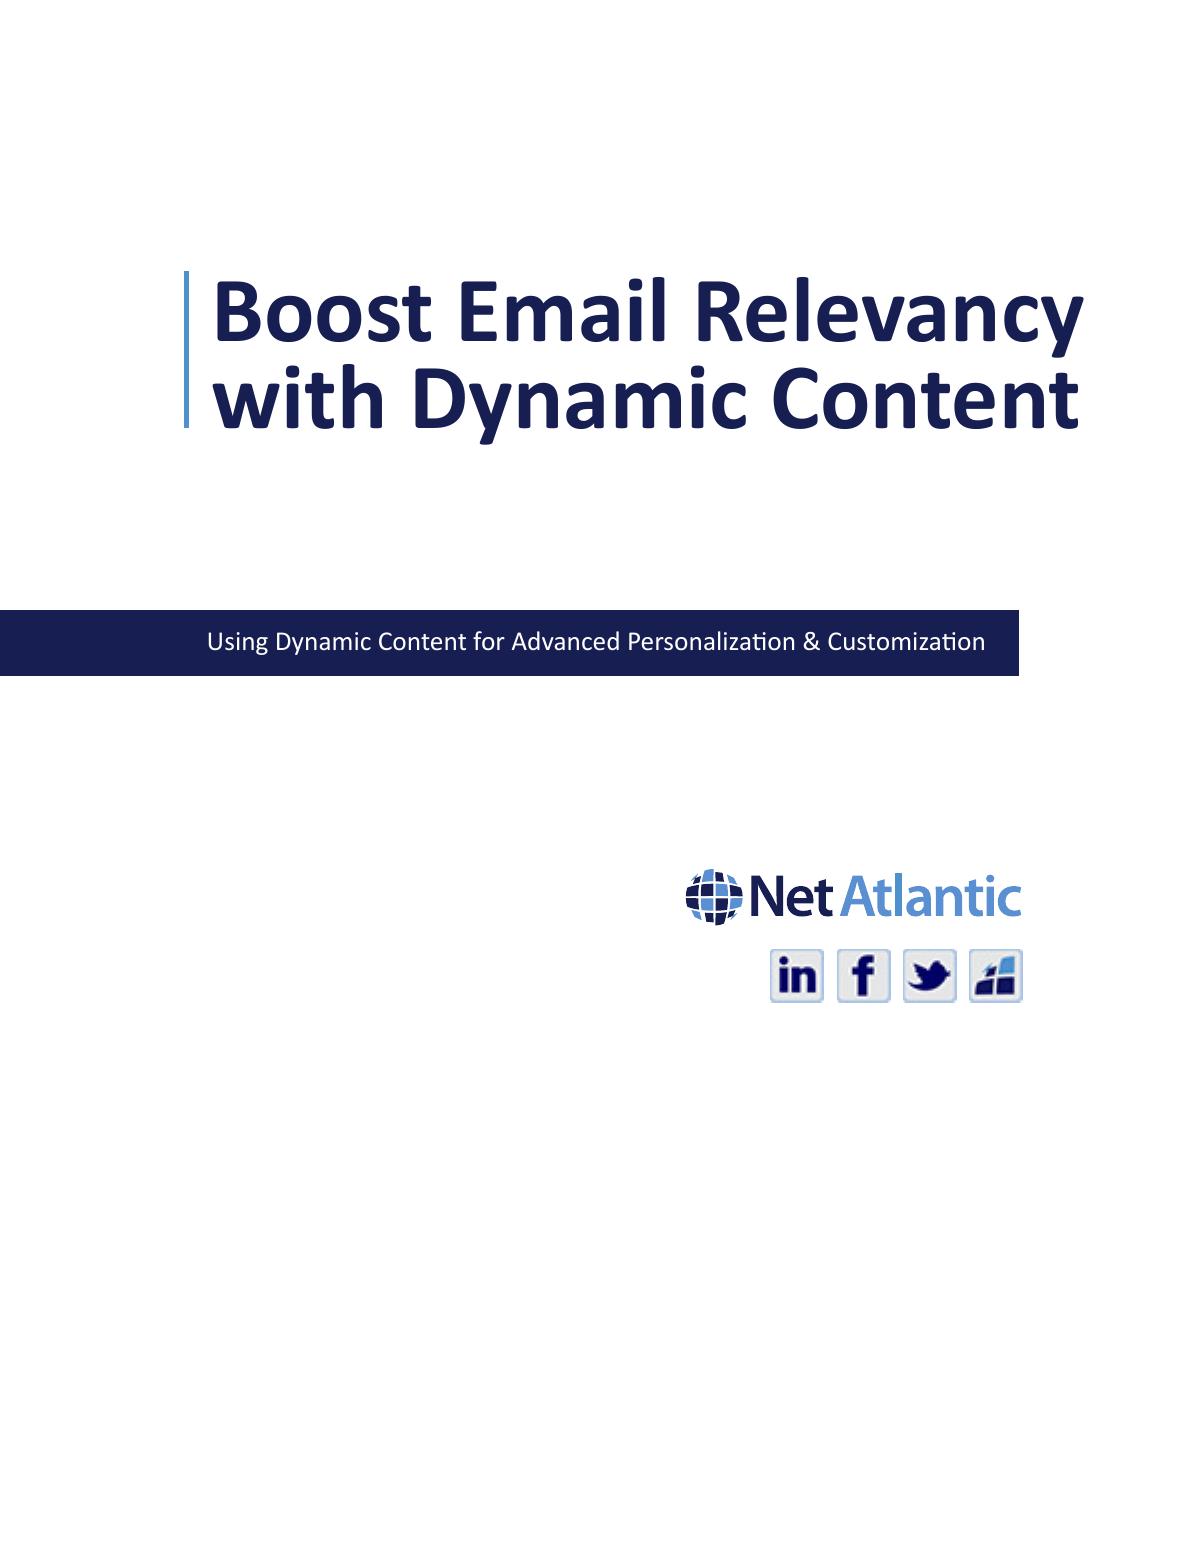 Boost Email Relevancy with Dynamic Content